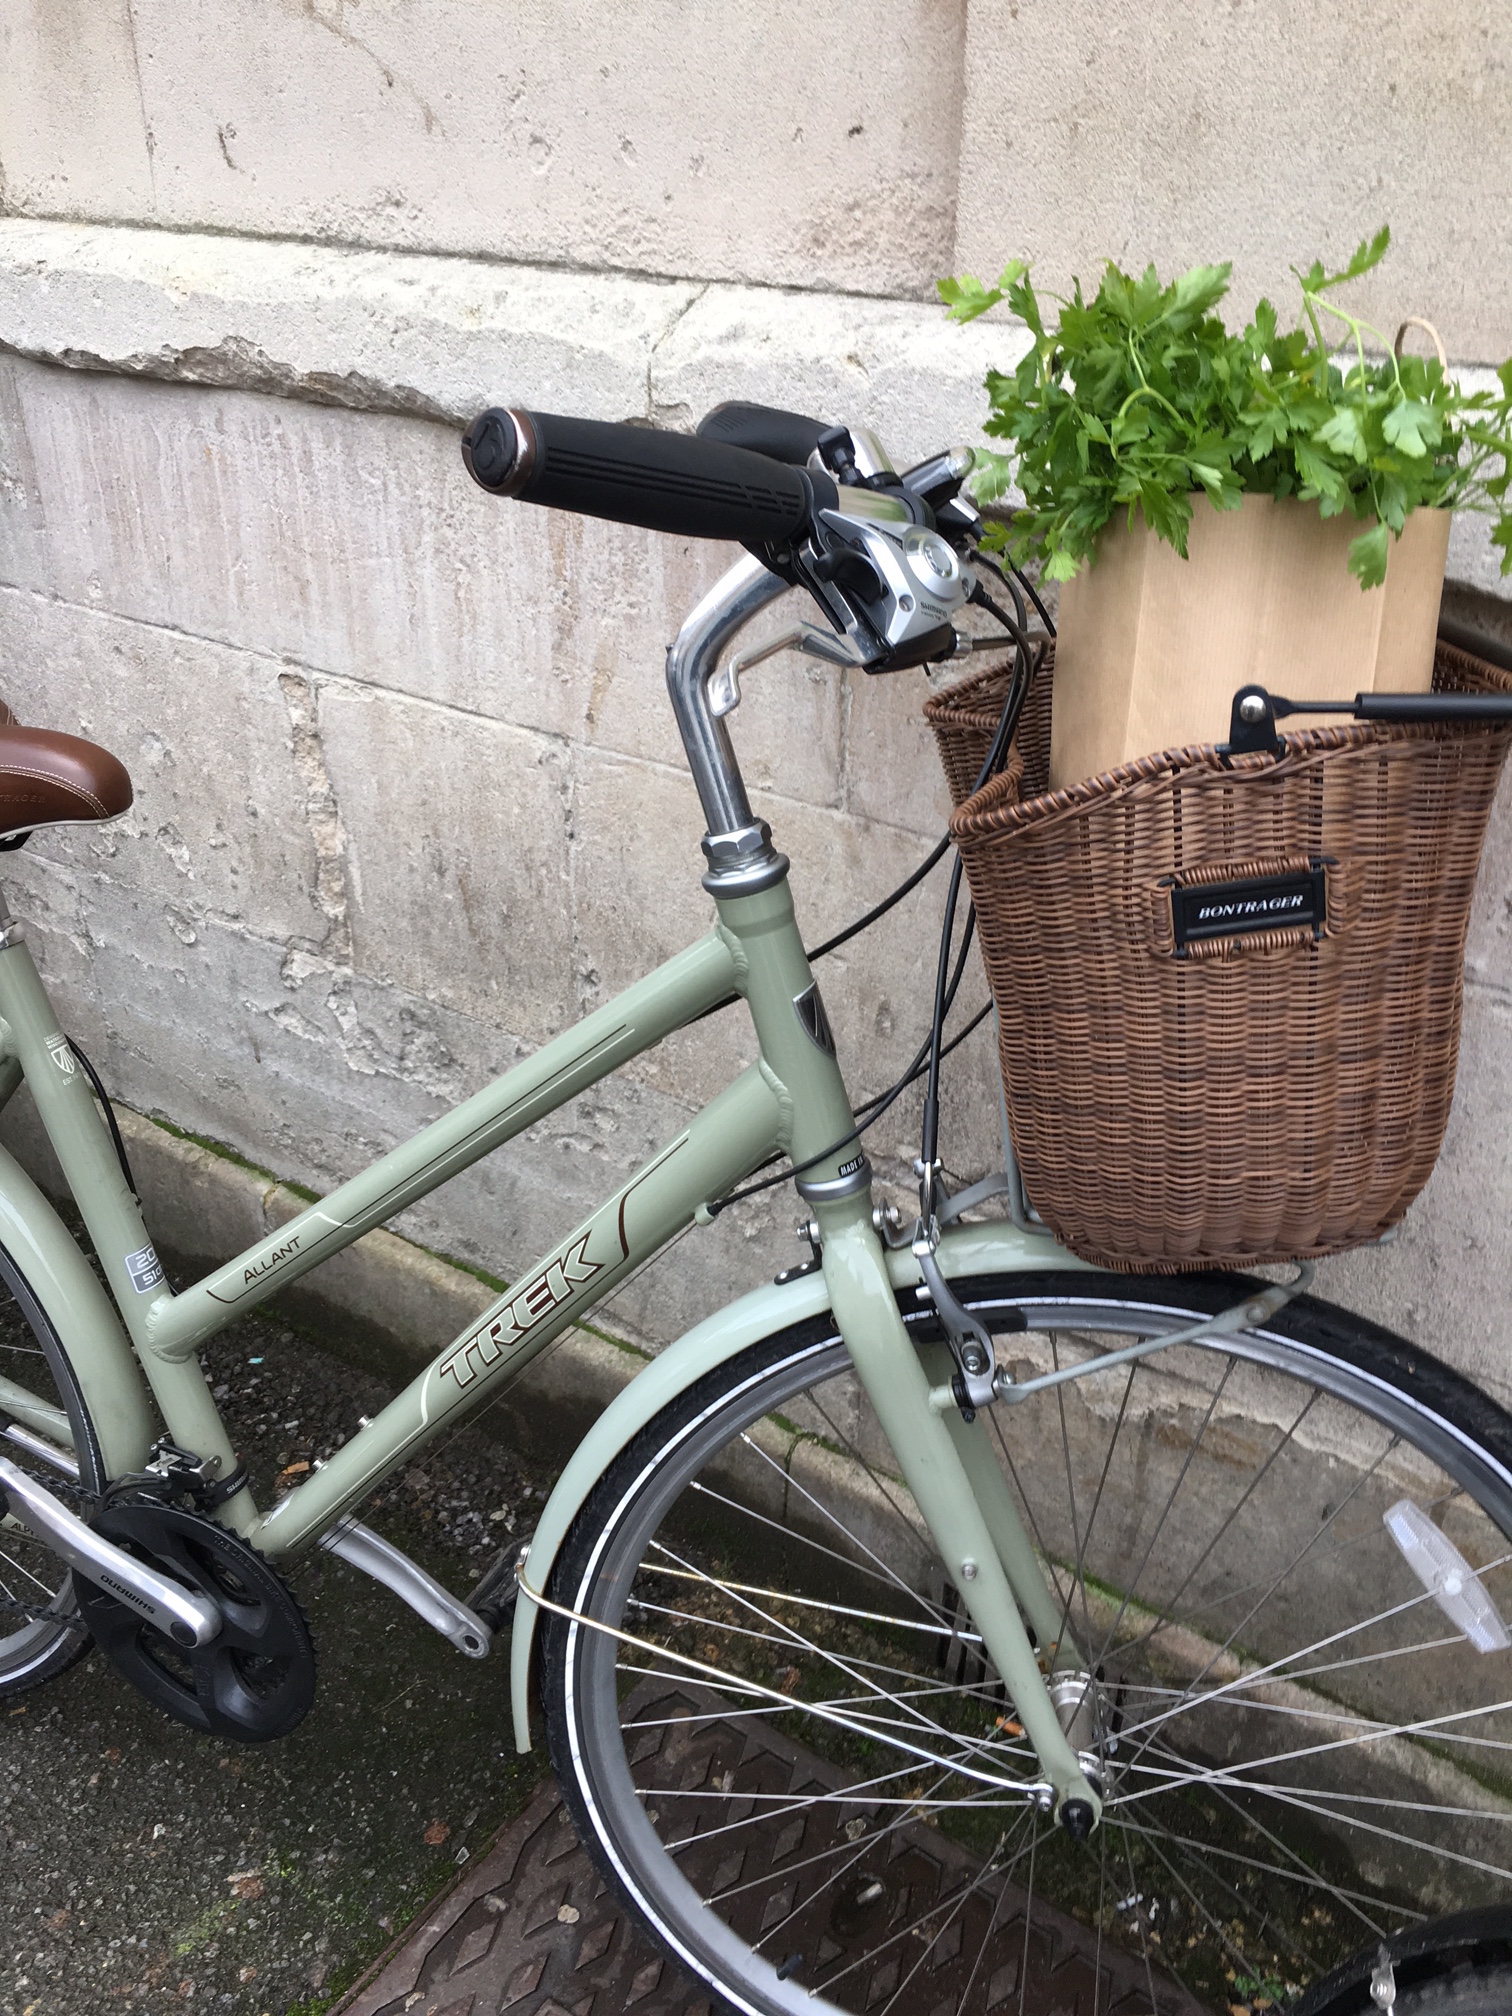 The Educated Traveller Bike - requires urgent transportation to Italy